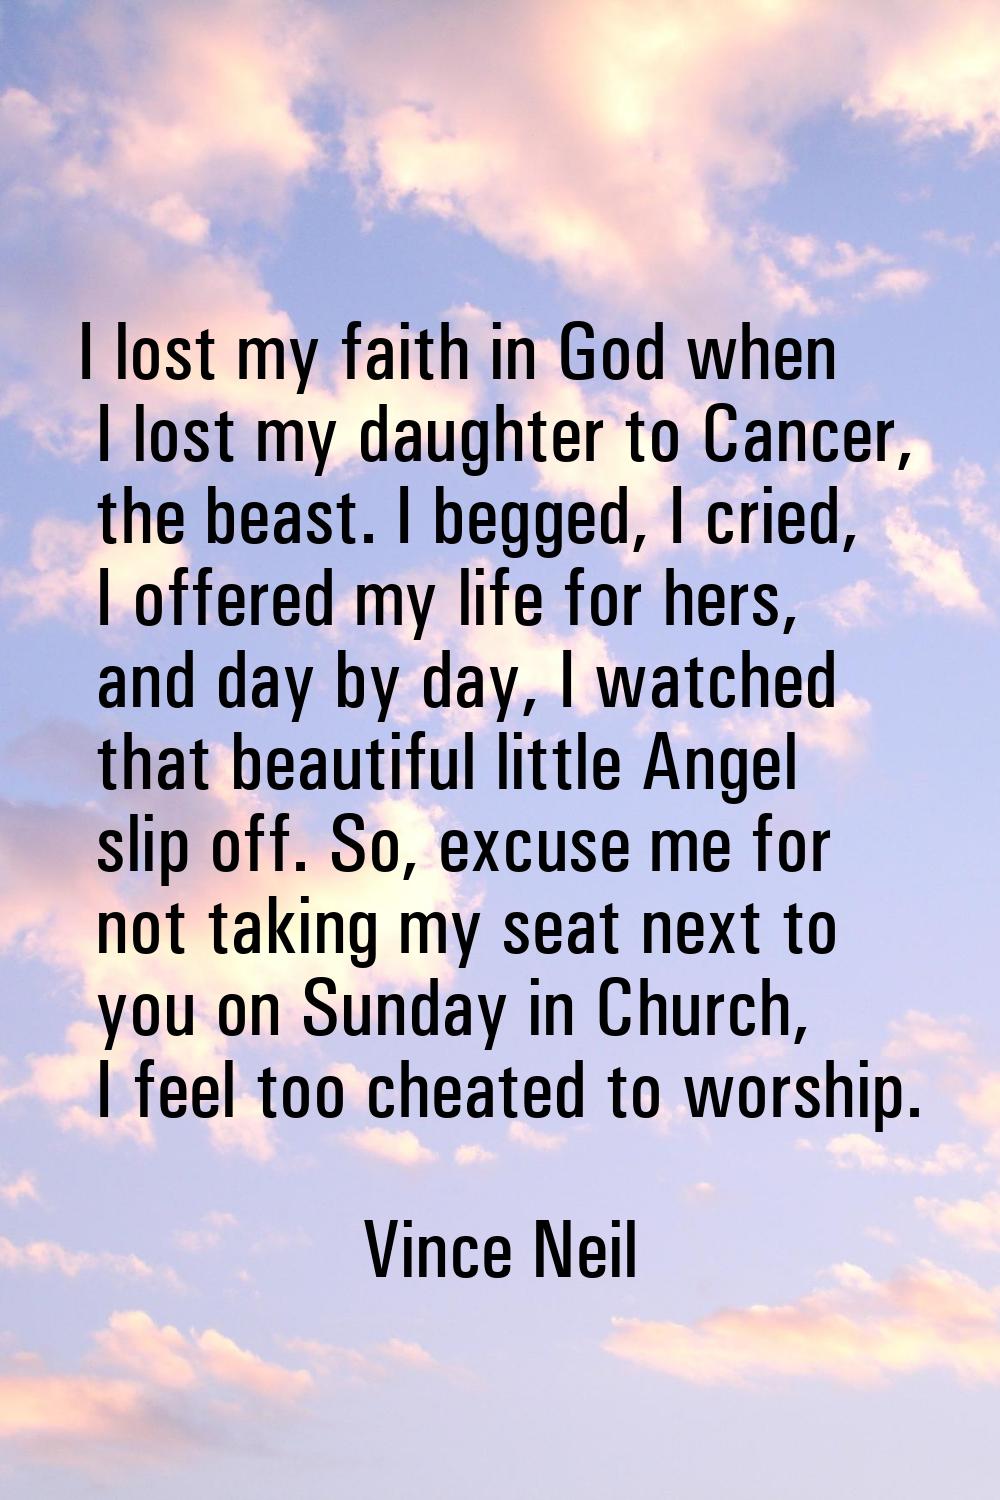 I lost my faith in God when I lost my daughter to Cancer, the beast. I begged, I cried, I offered m